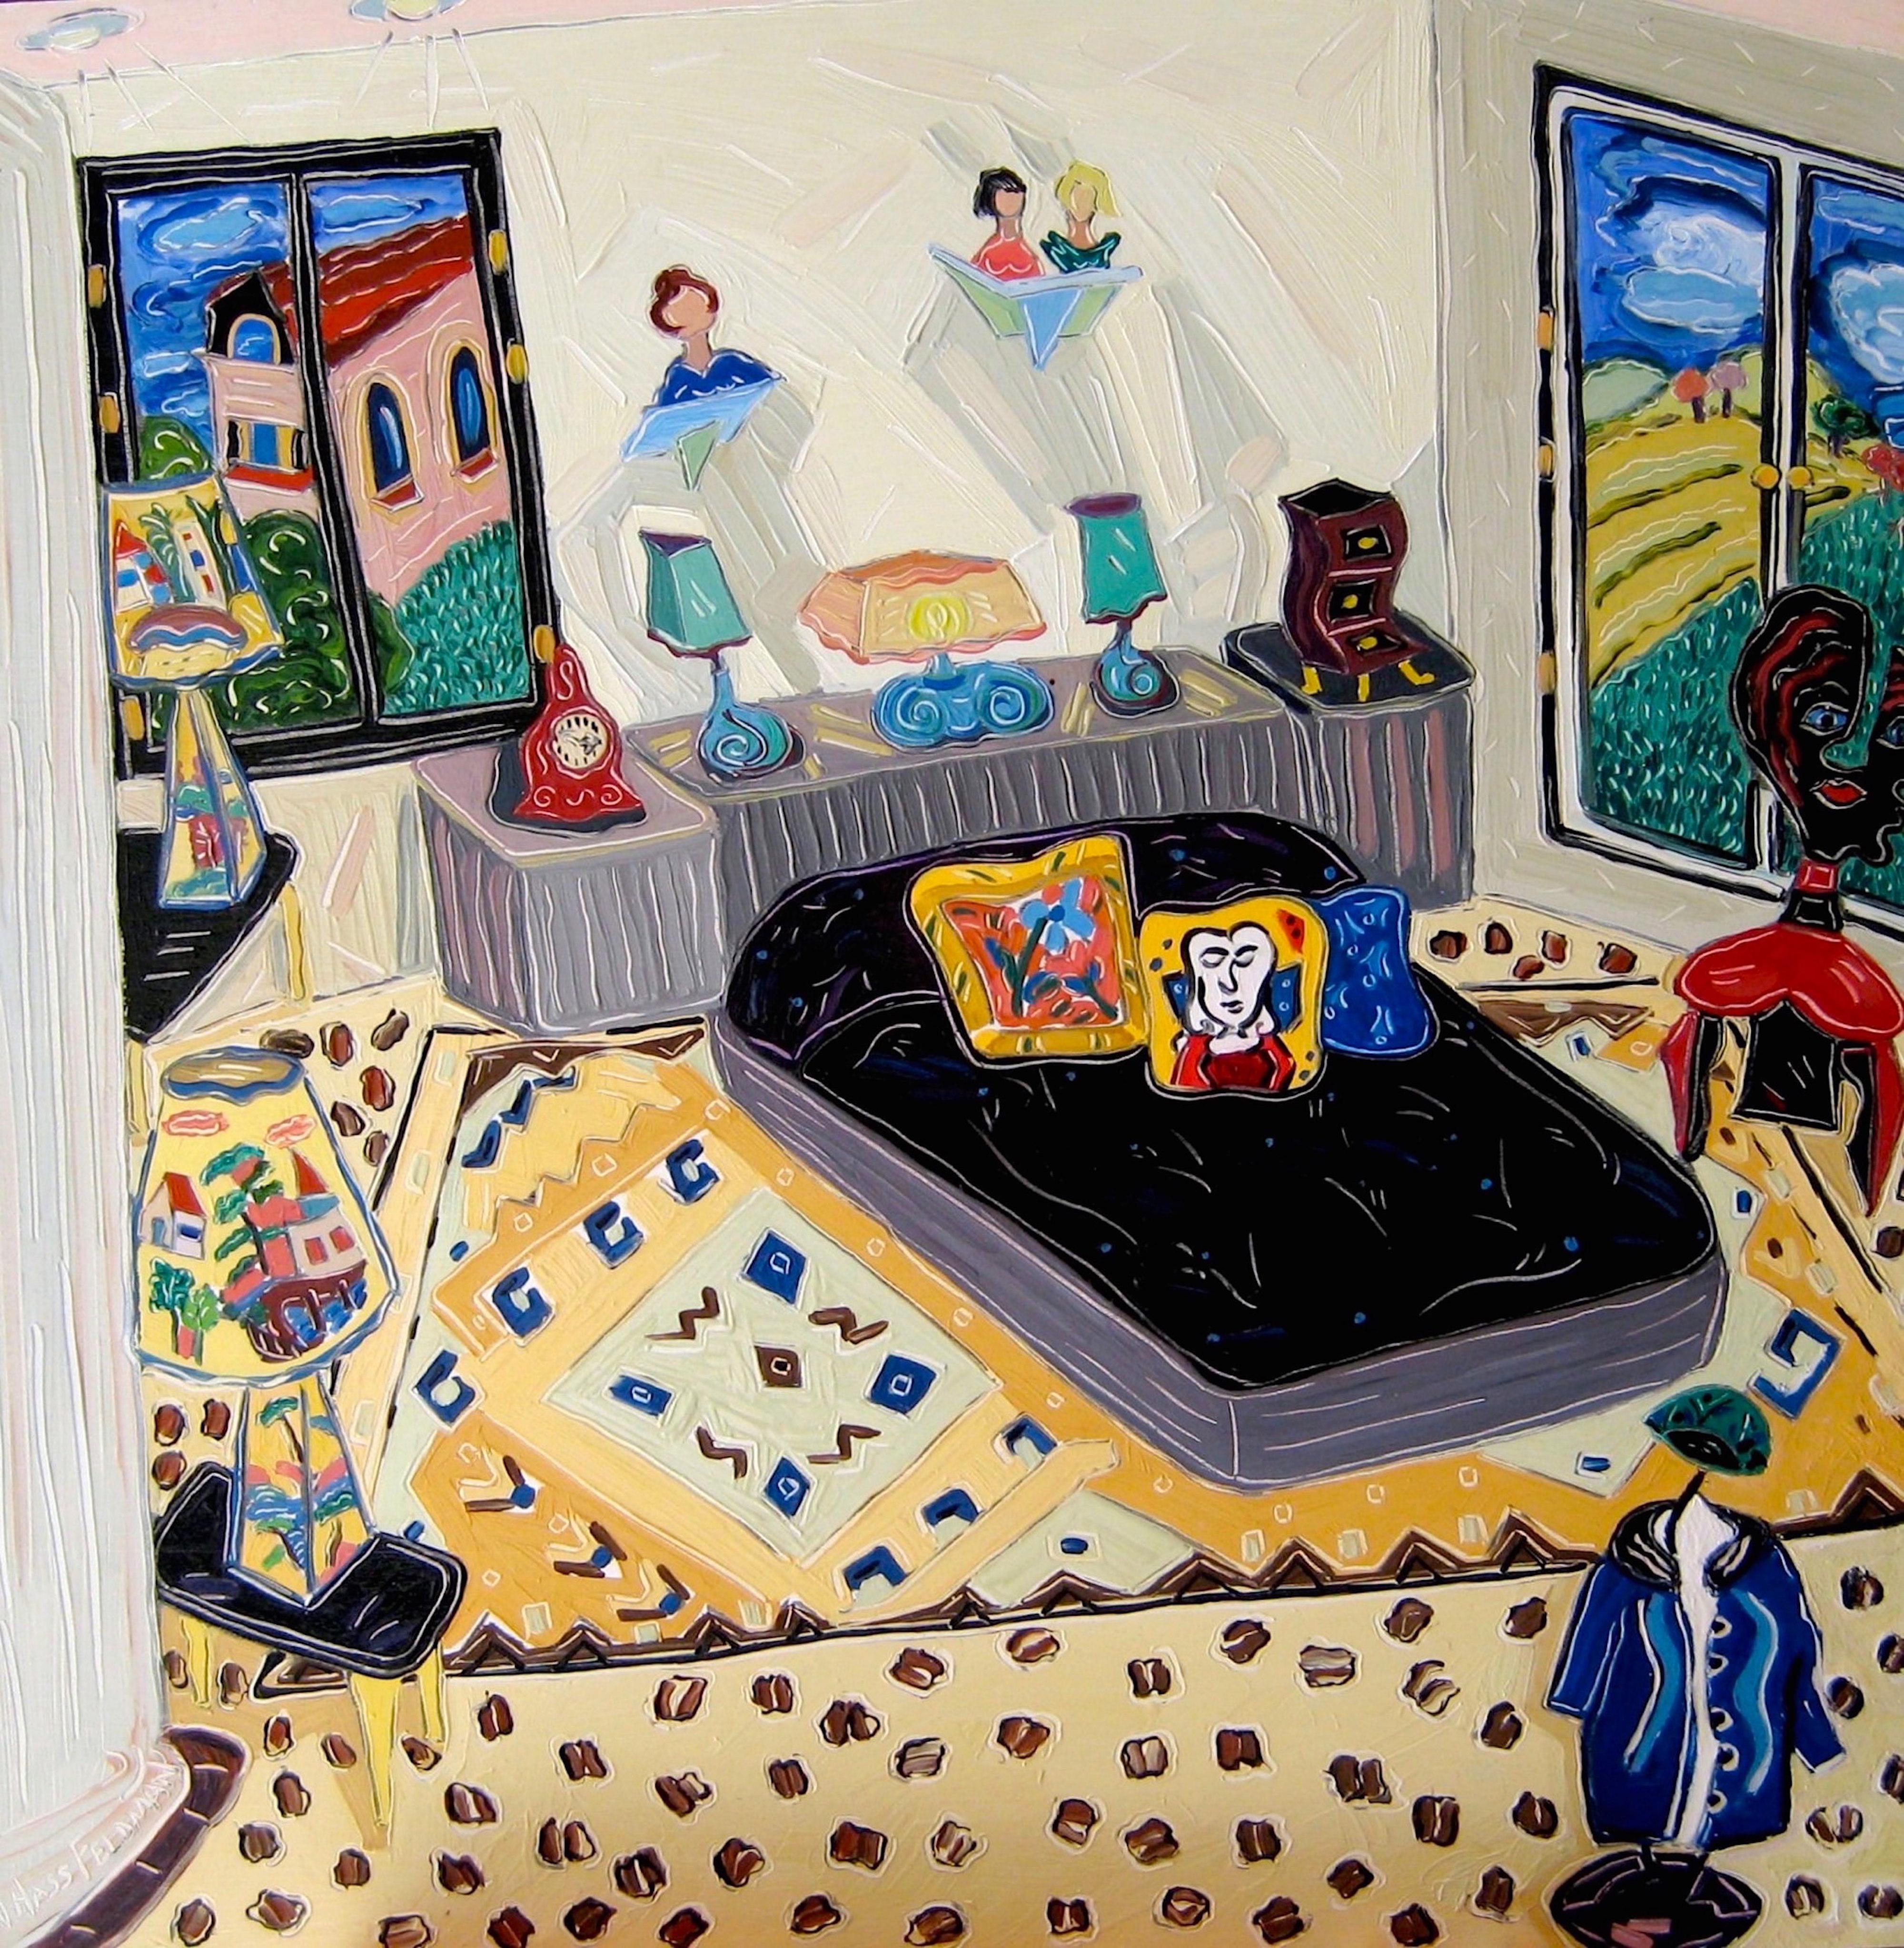 "The Village Lamps", interiors, leopard, yellows, greens, blues, oil painting - Painting by Nan Hass Feldman